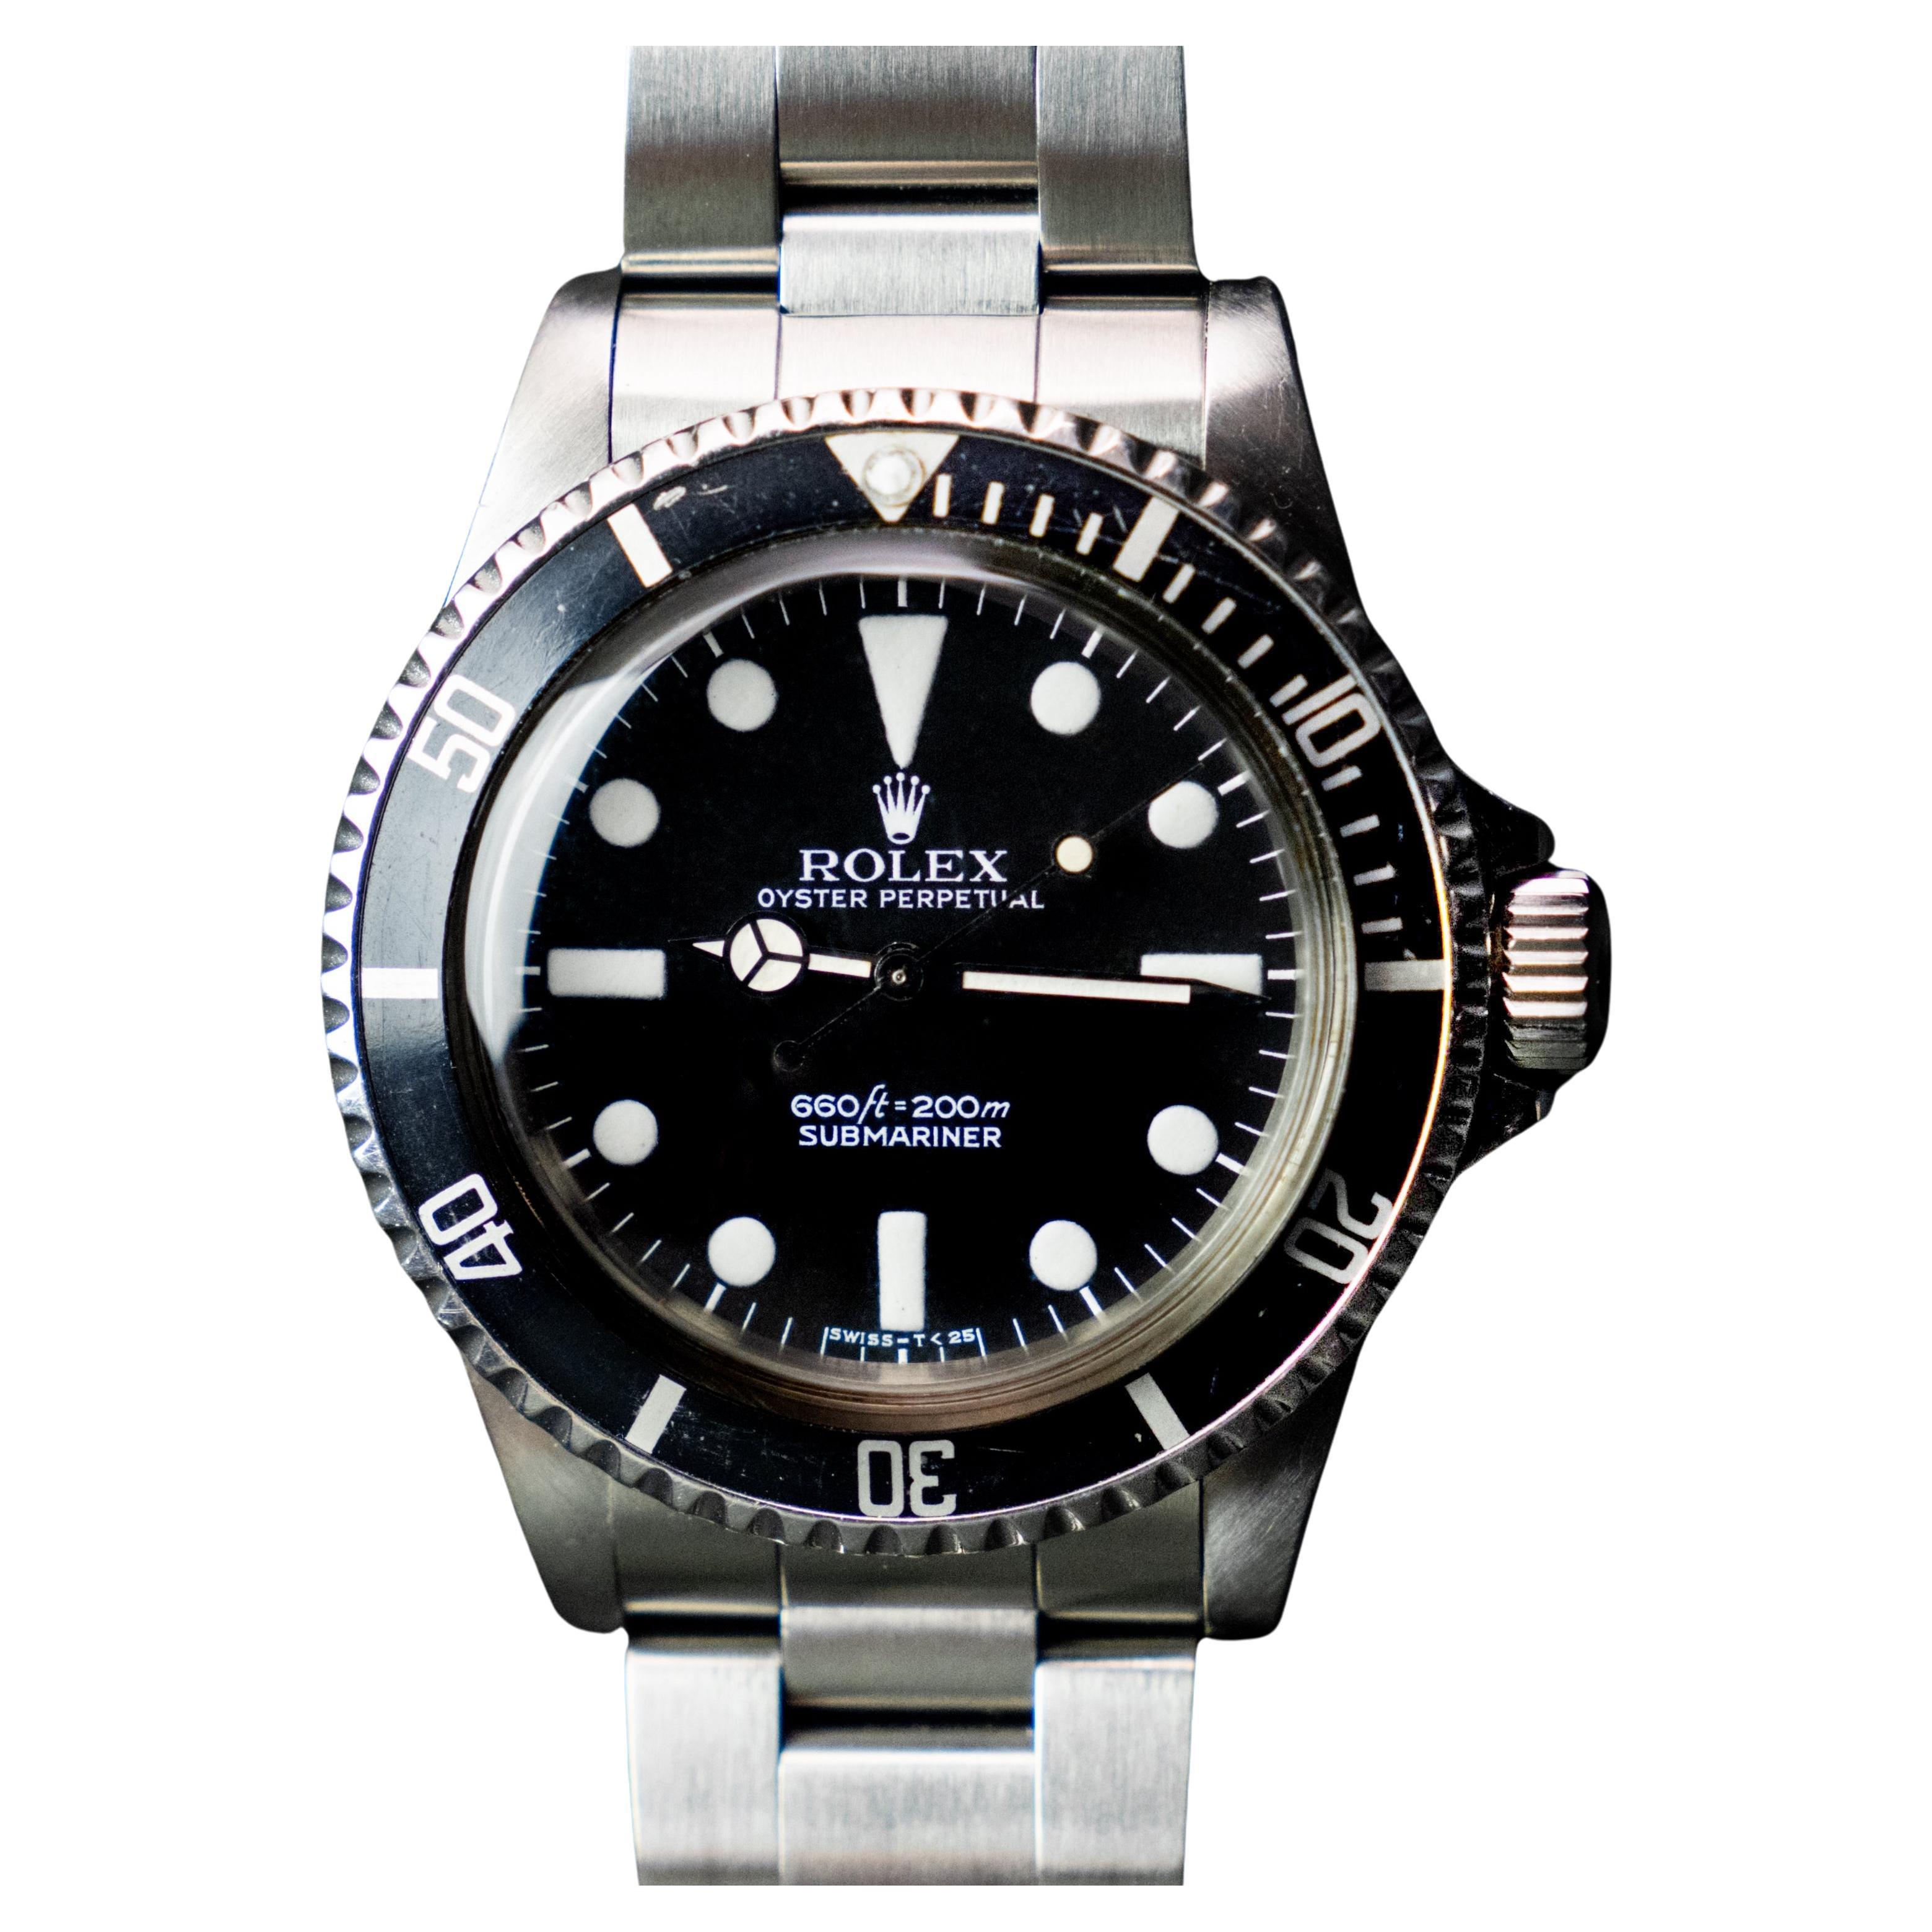 Rolex Steel Submariner Maxi MK I Matte Dial 5513 Steel Automatic Watch, 1978 For Sale